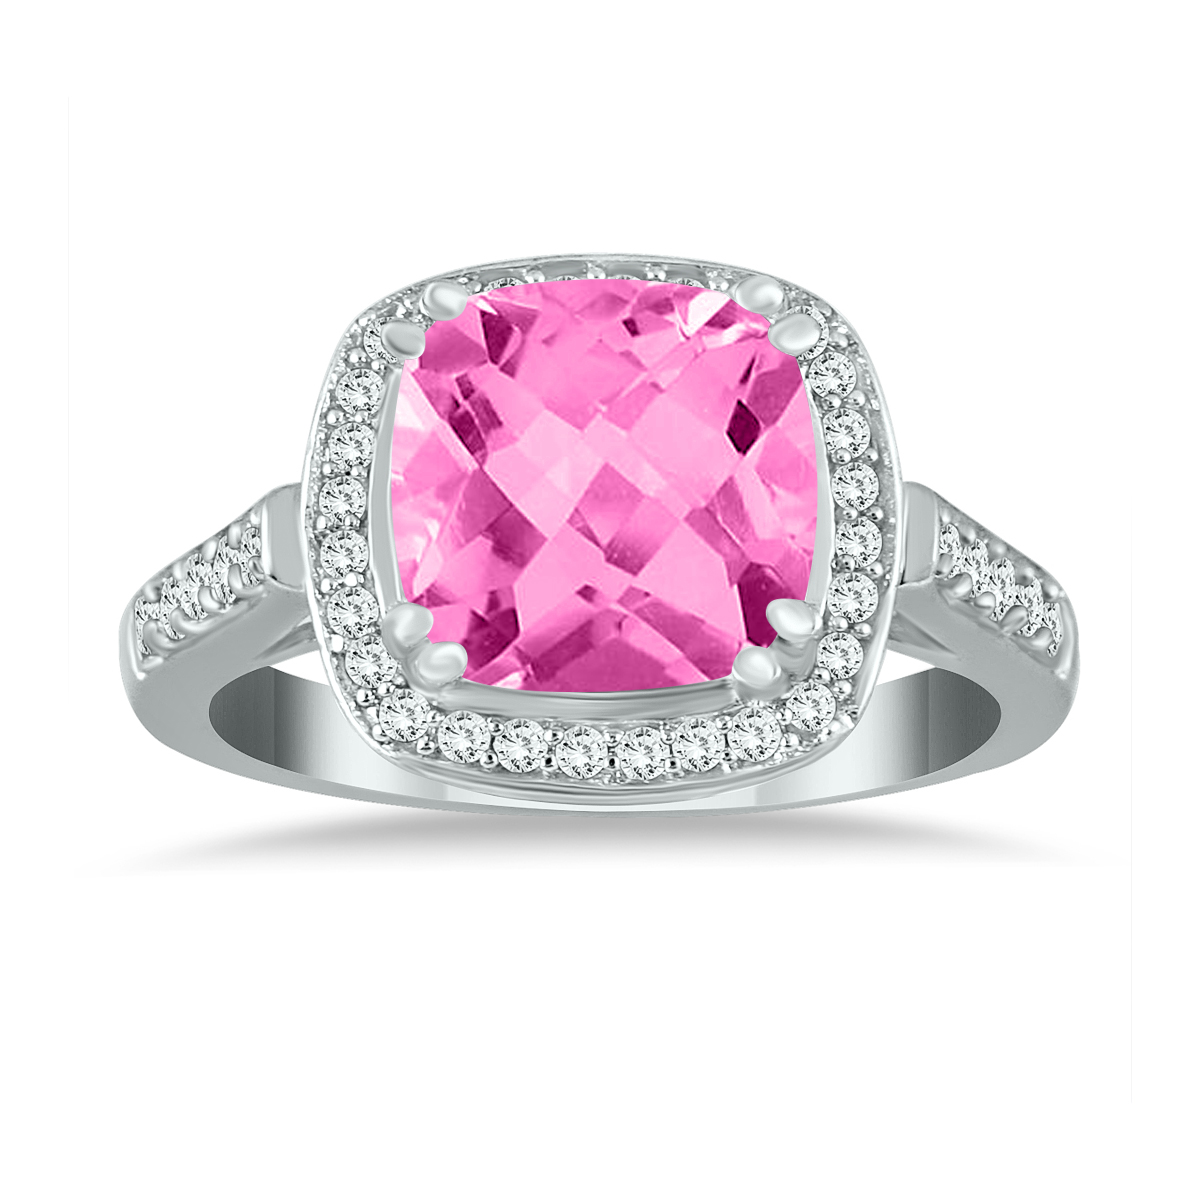 Cushion Cut Pink Topaz and Diamond Ring in 14K White Gold